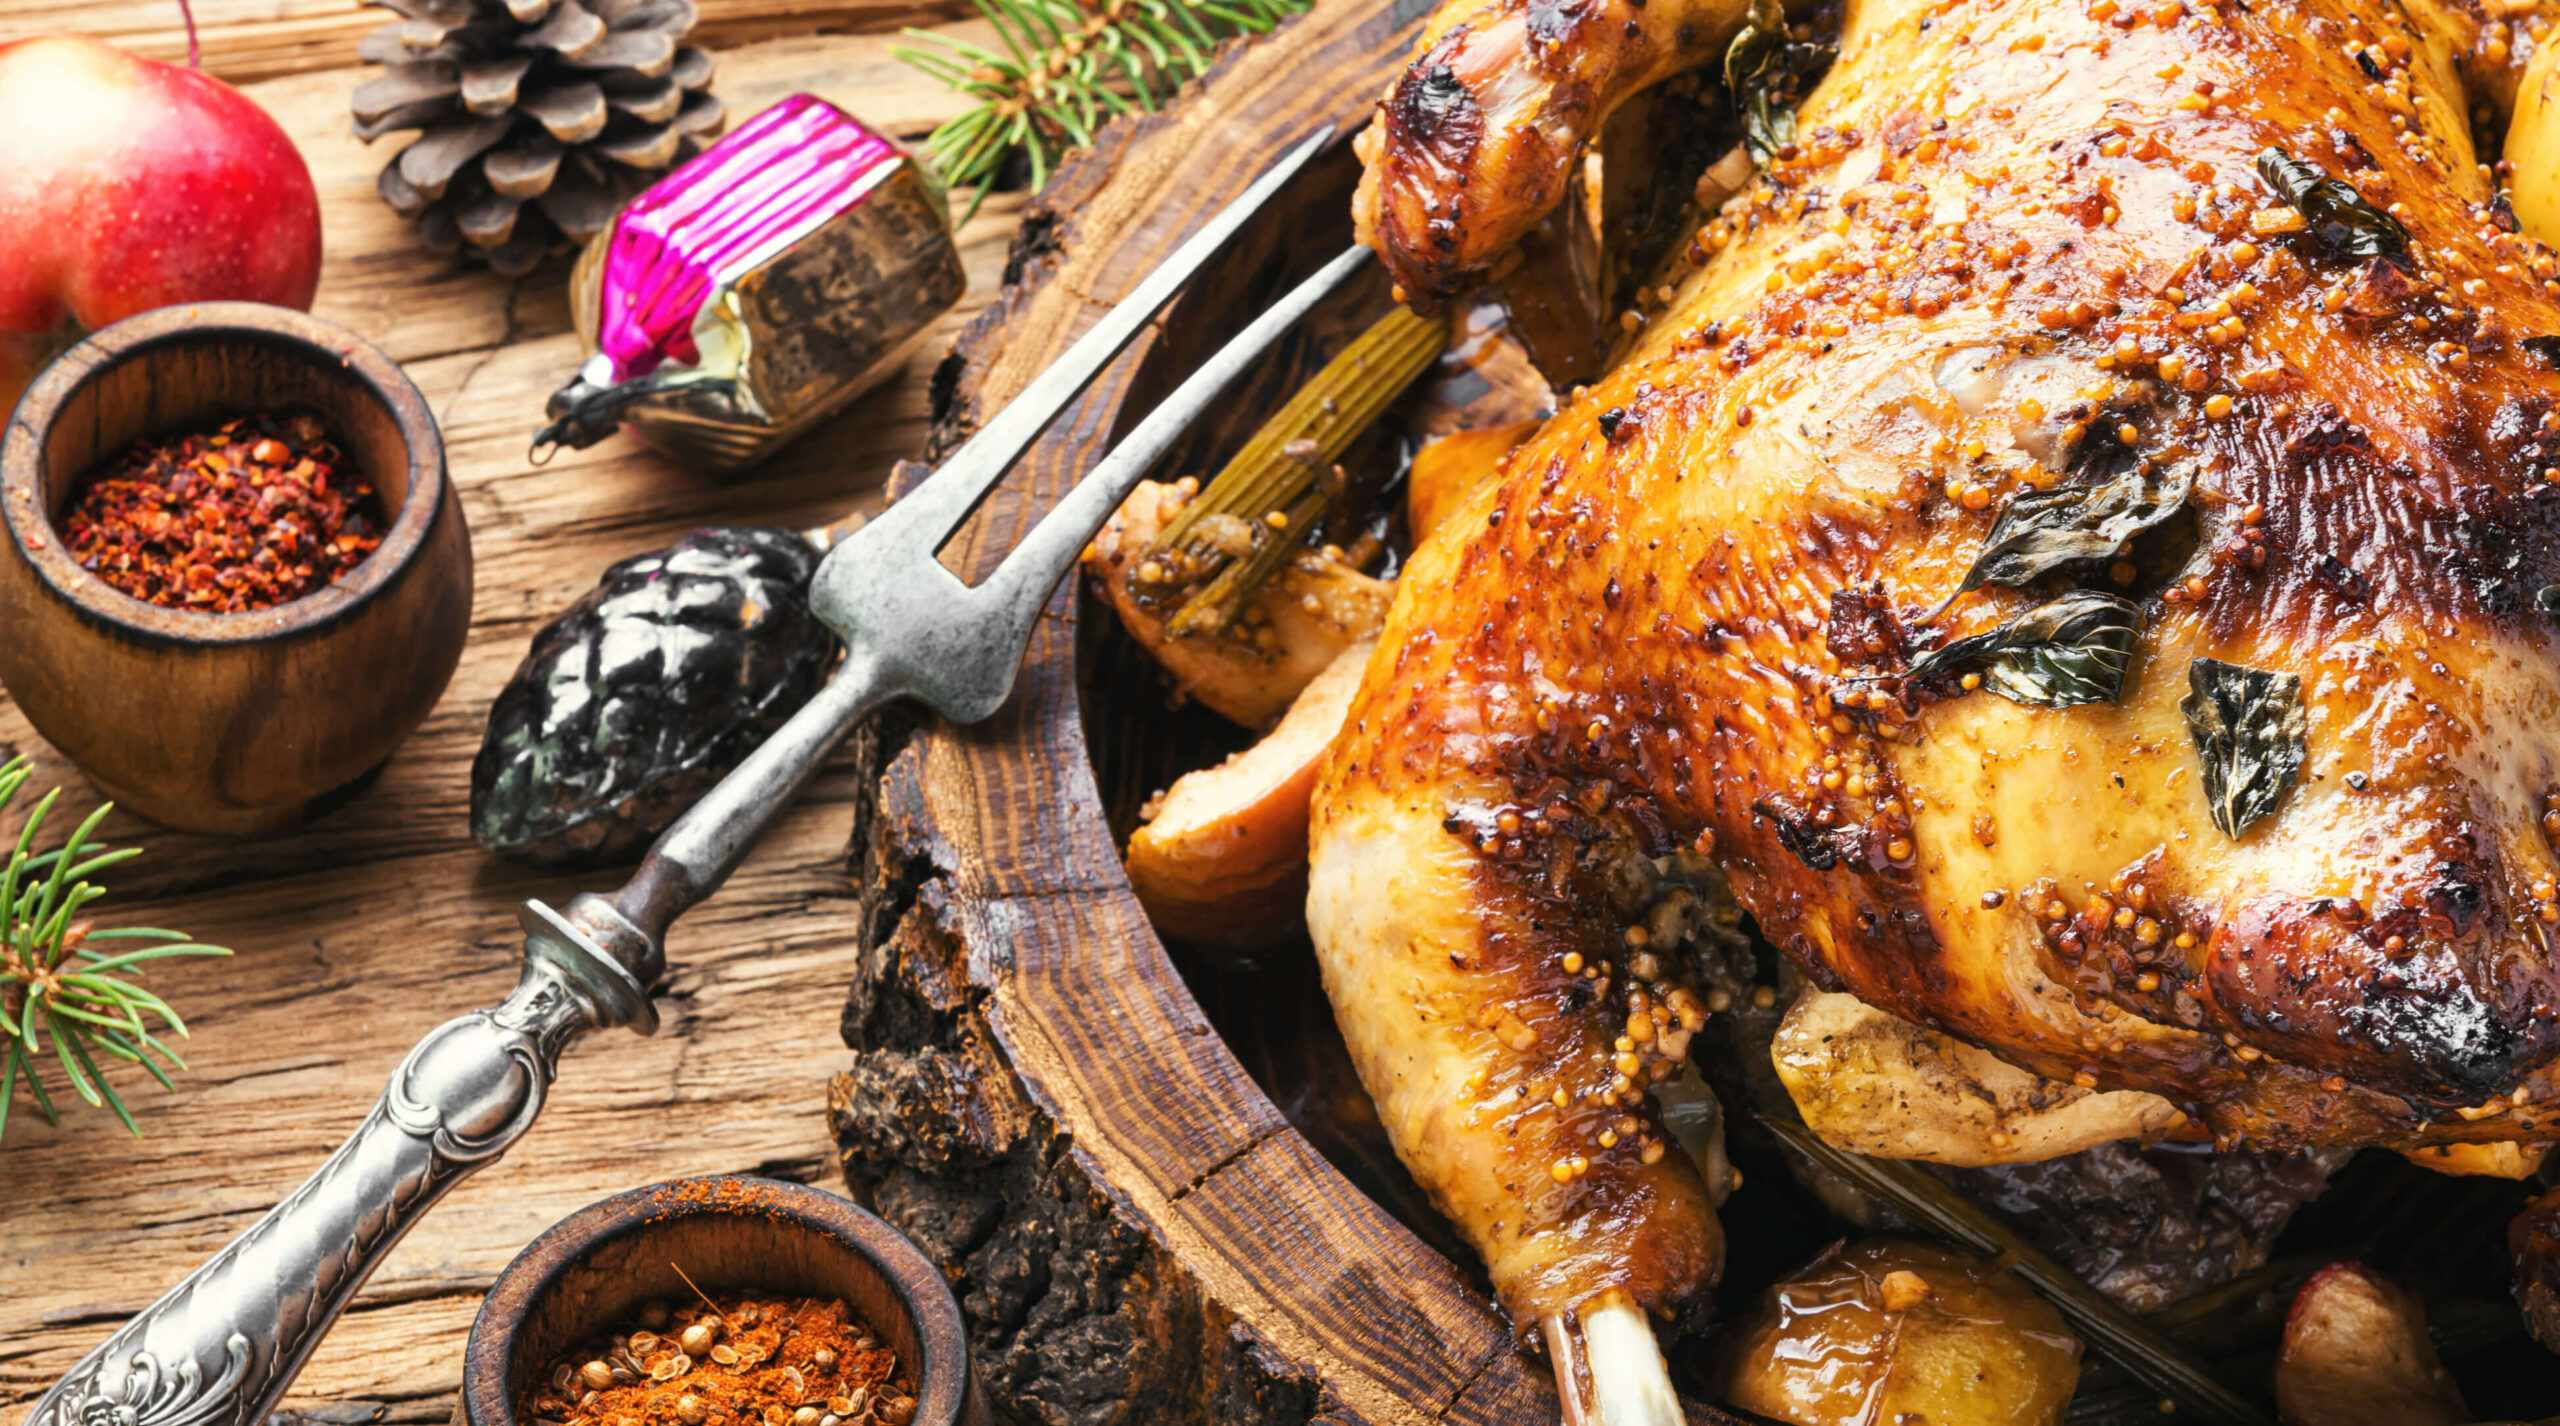 Featured image for “Let’s Talk Turkey: New Flavors & Uses to Spice Things Up”